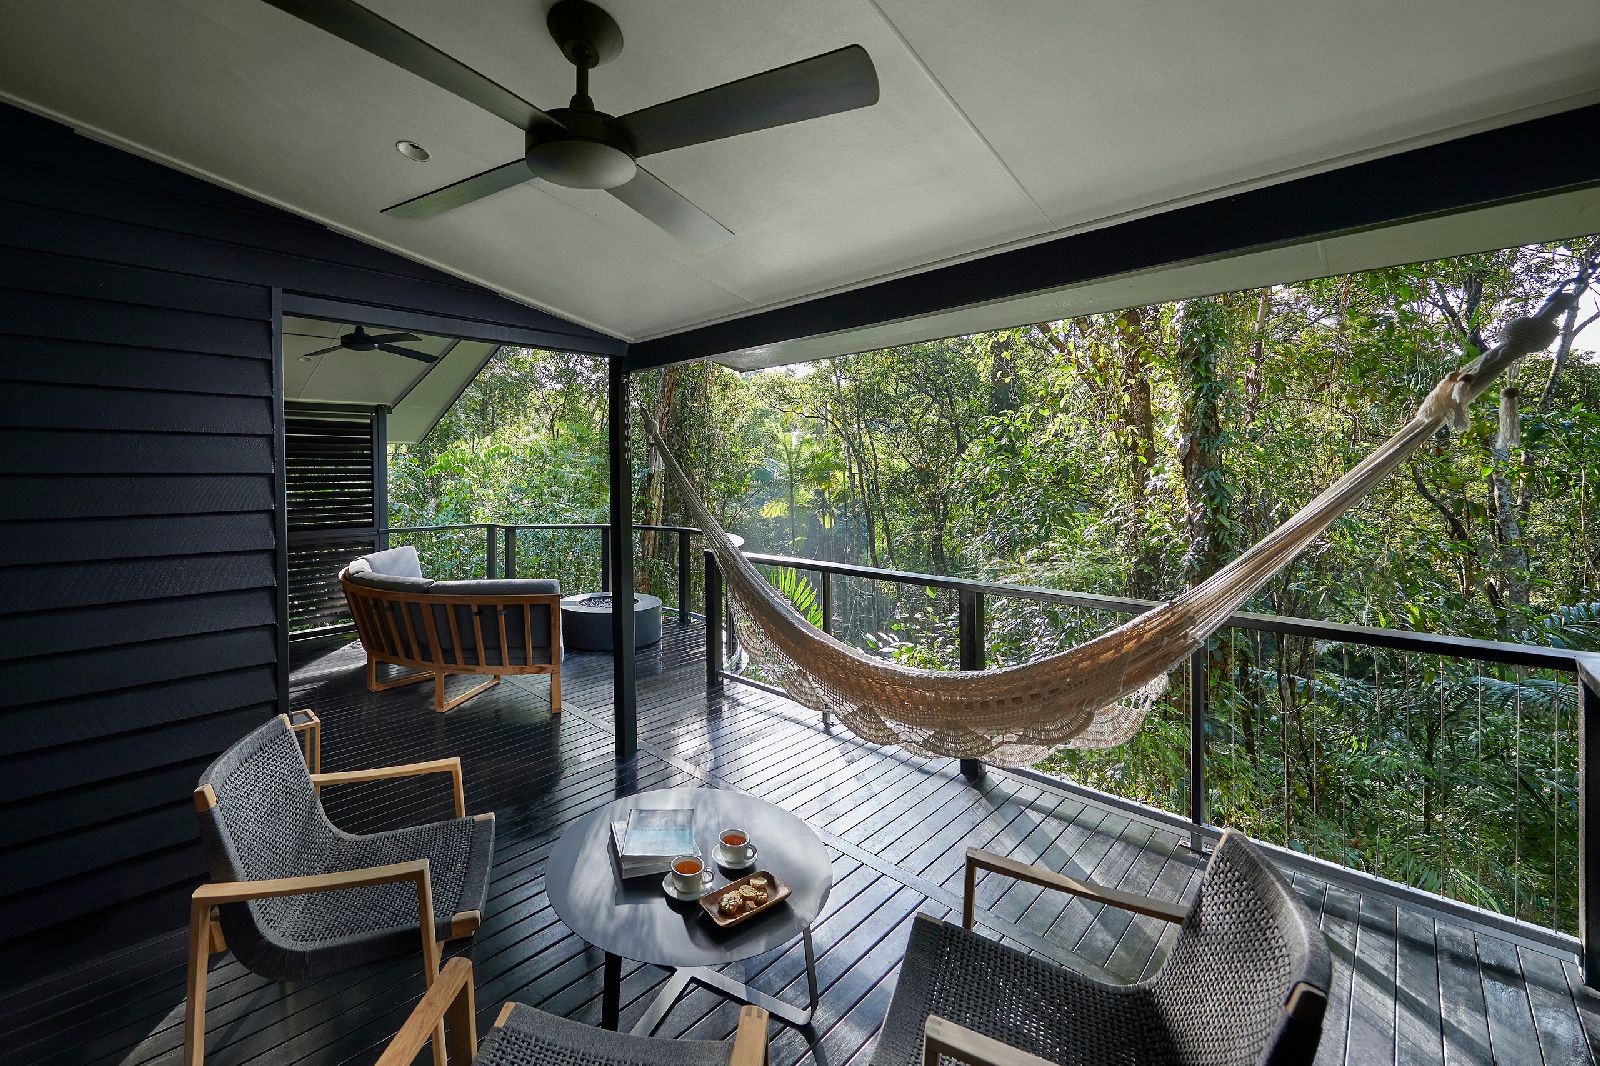 Private balcony and hammock of a Billabong Suite at Silky Oaks Daintree Australia